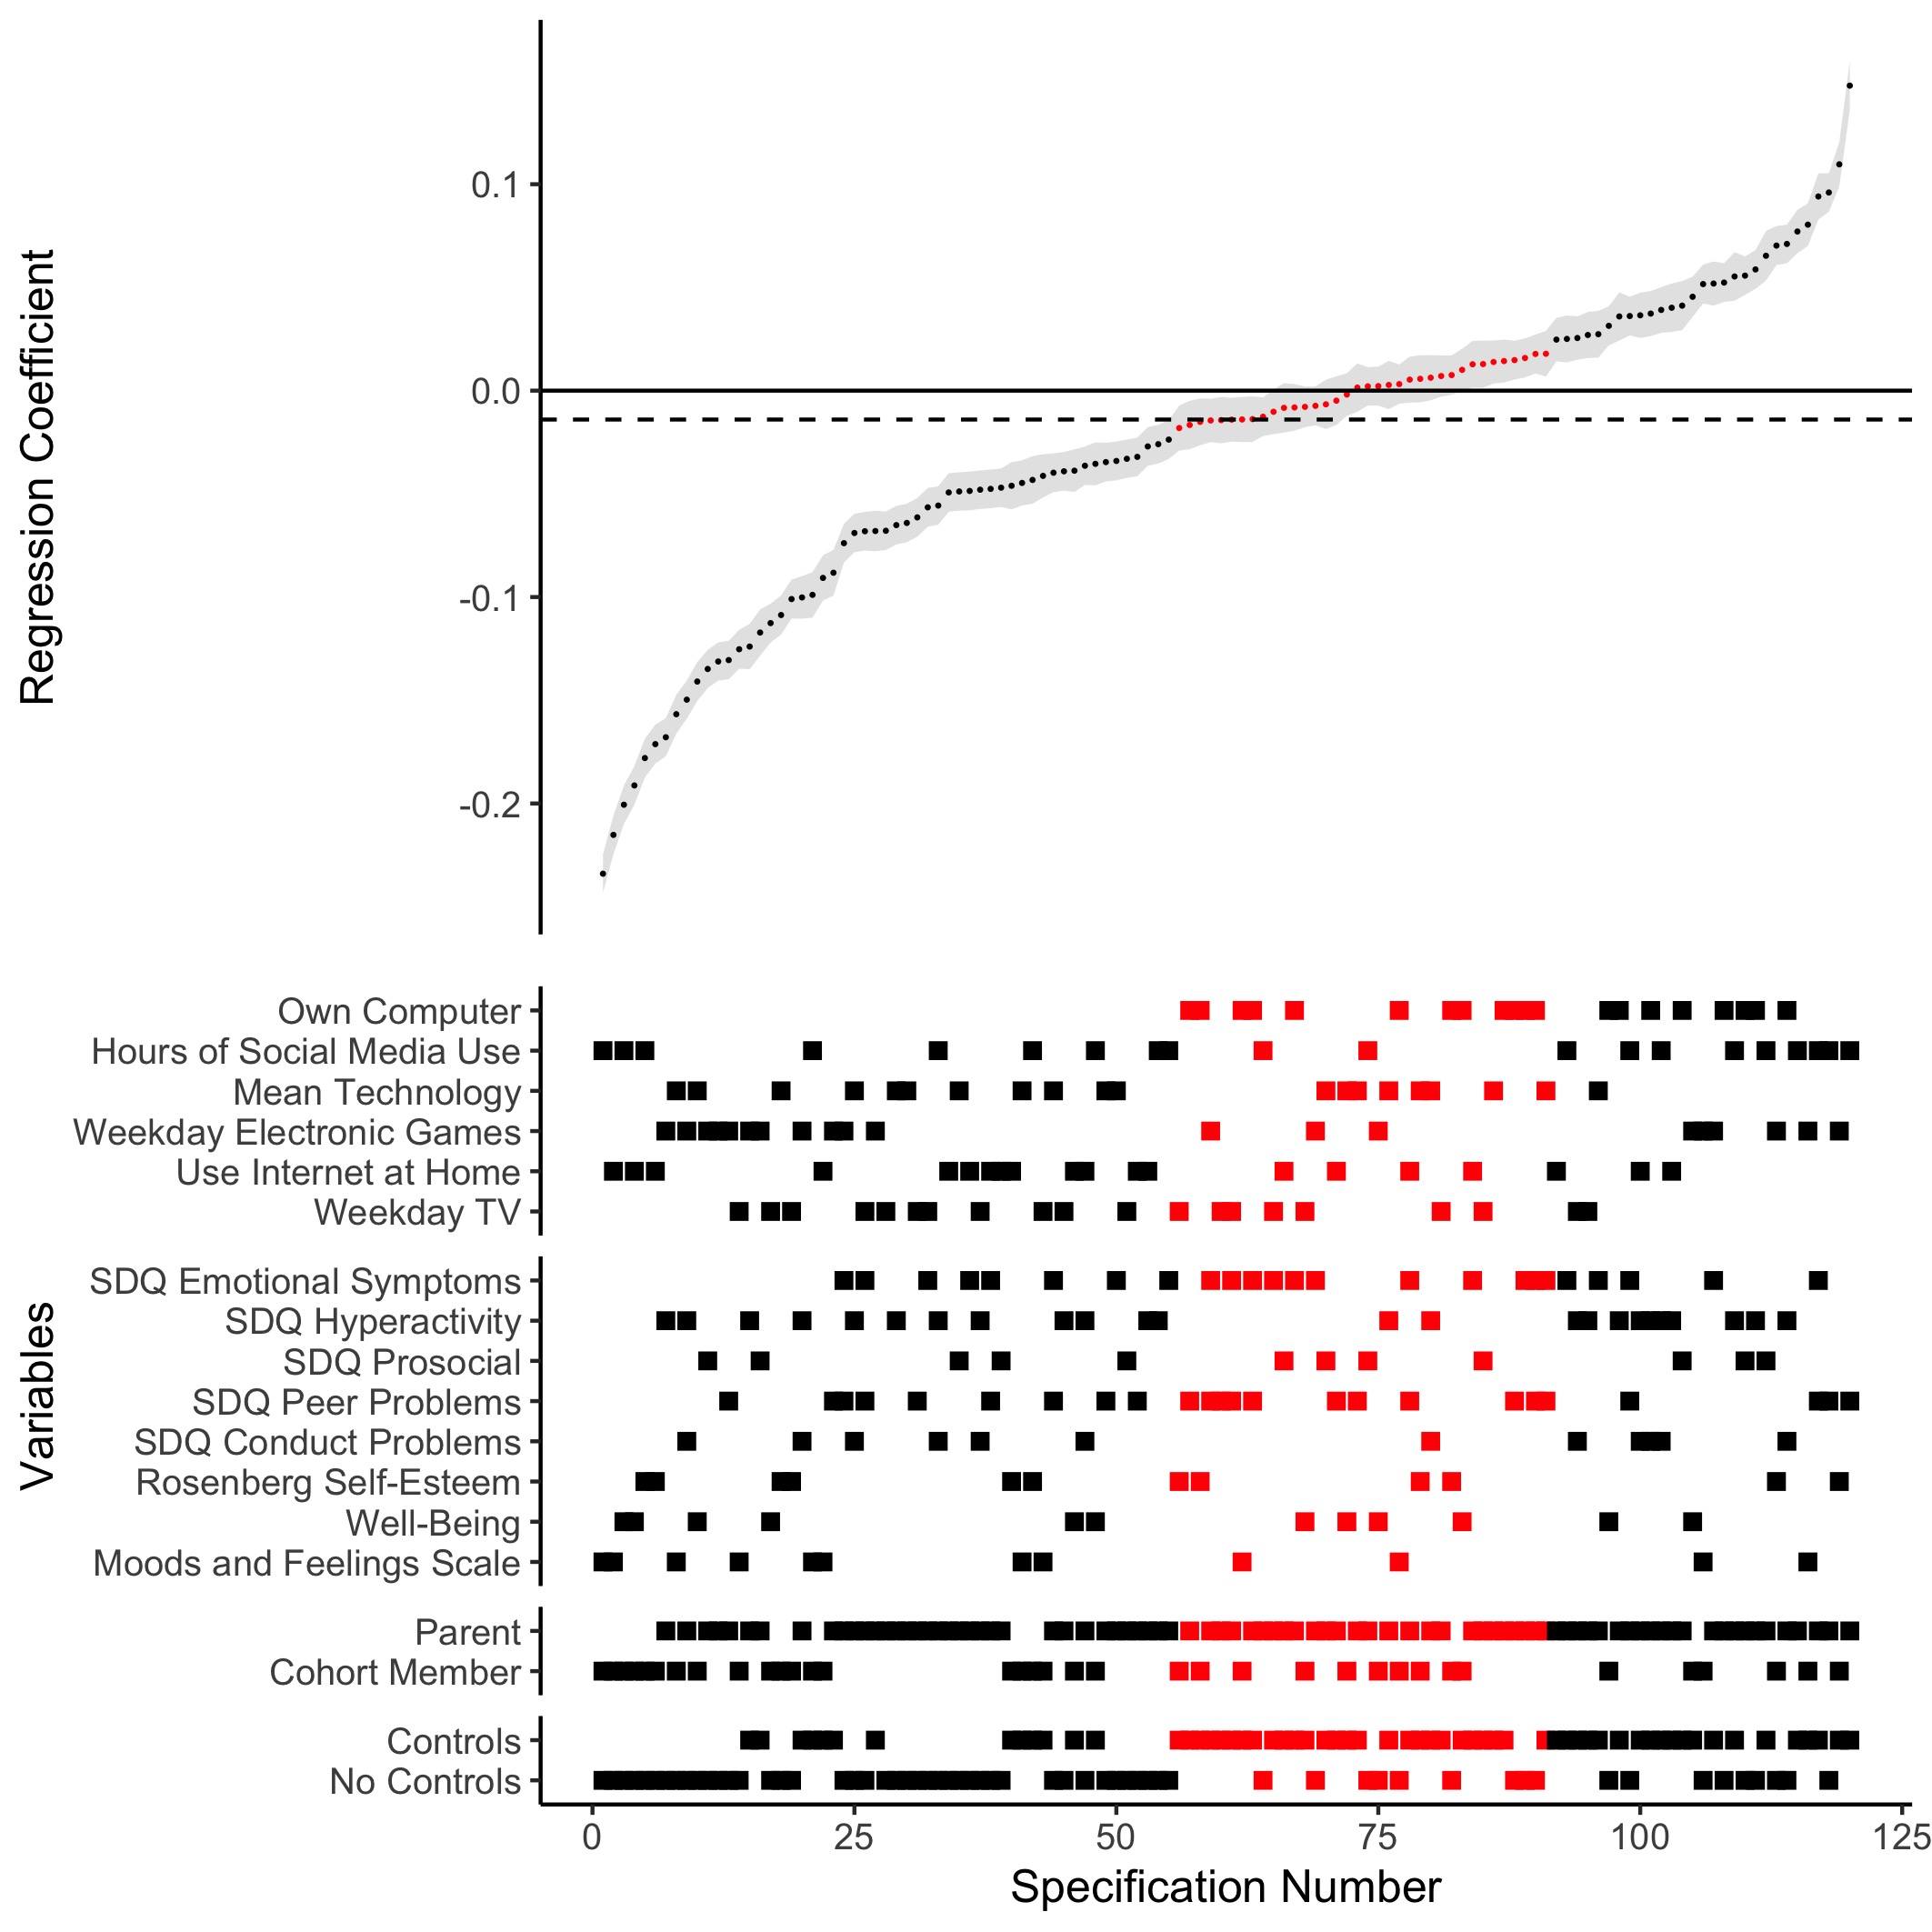 Specification Curve Analysis of MCS examining net effects across prespecified well-being subscales. The red squares indicate specifications that were non-significant, while the black squares represent specifications that were significant. The error bars represent the Standard Error. The dotted line indicates the median regression coefficient present in the SCA and is included to ease interpretation of the analysis.